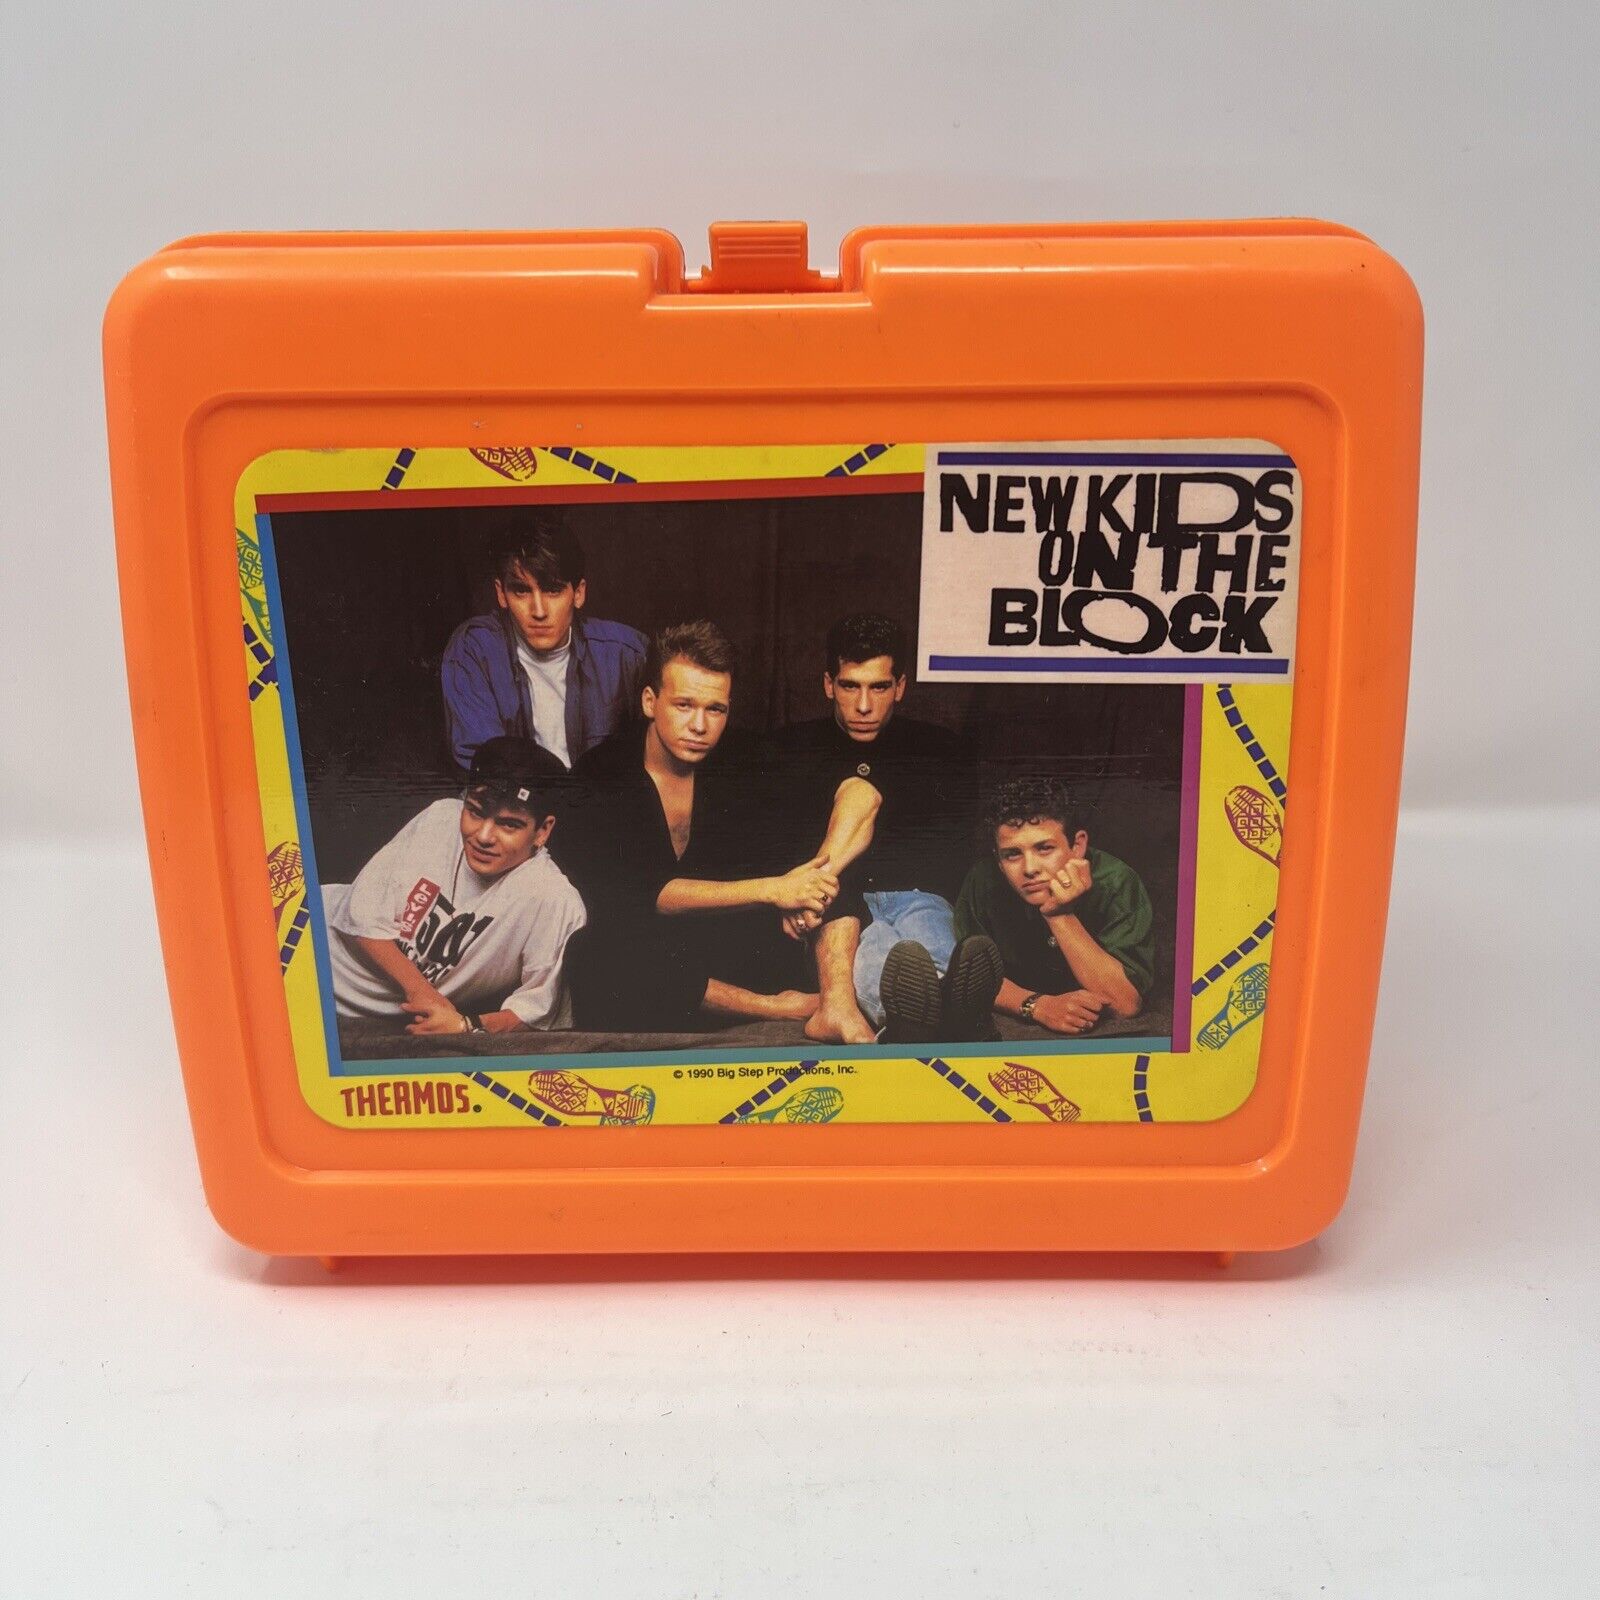 Vintage 1990 Thermos New Kids On The Block  Orange Plastic Lunch Box